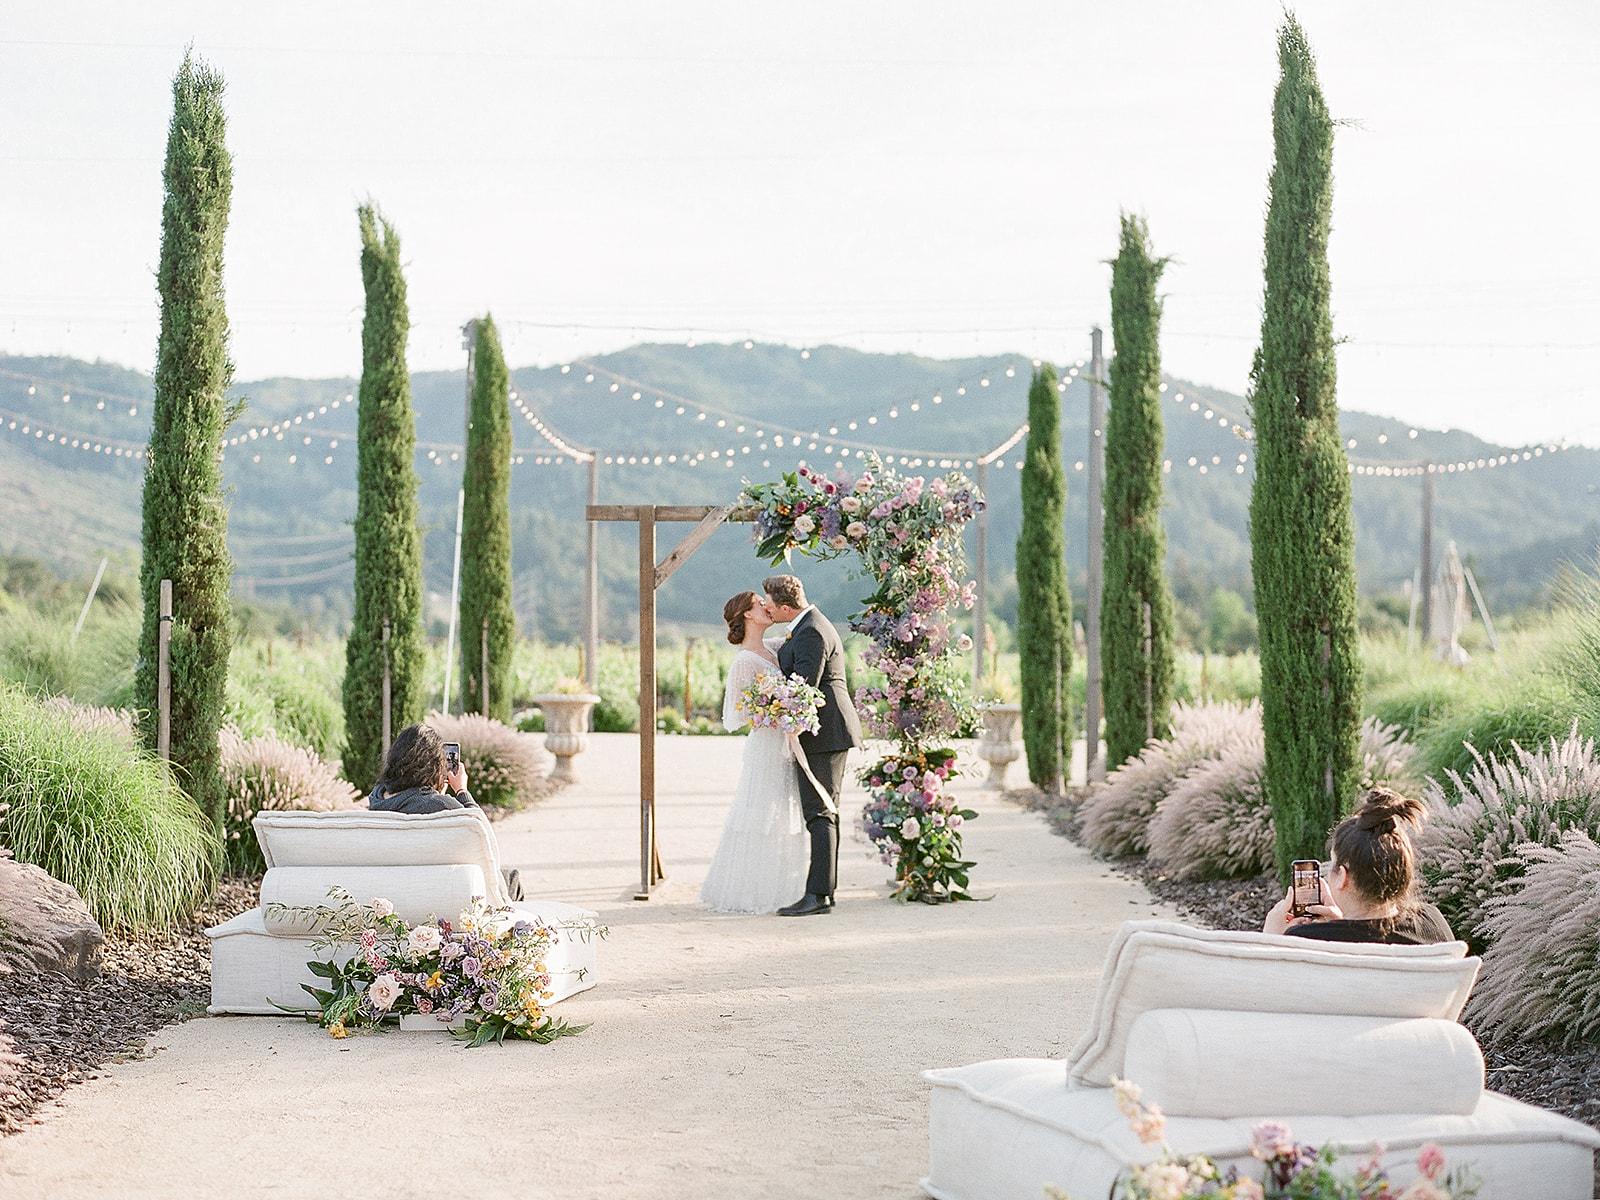 An Intimate Napa Wedding Filled With Endless Possibilities